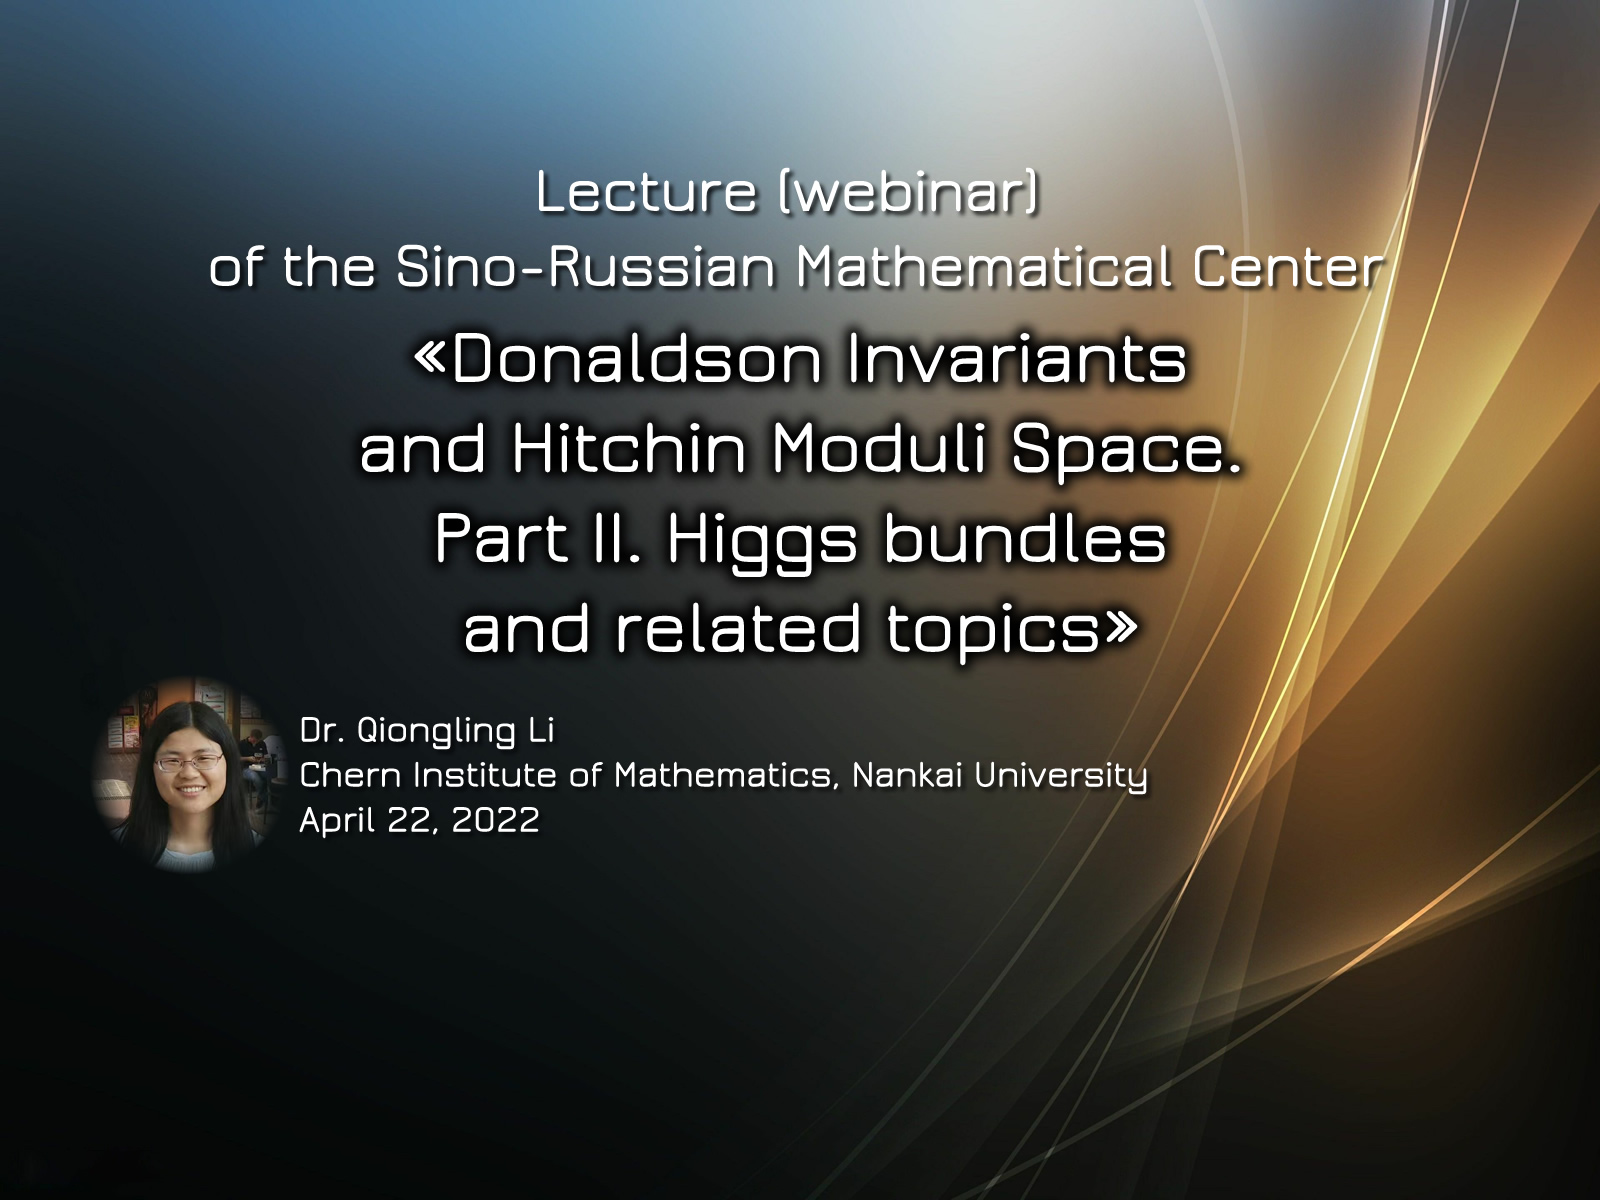 «Higgs bundles and related topics» 22.04.2022